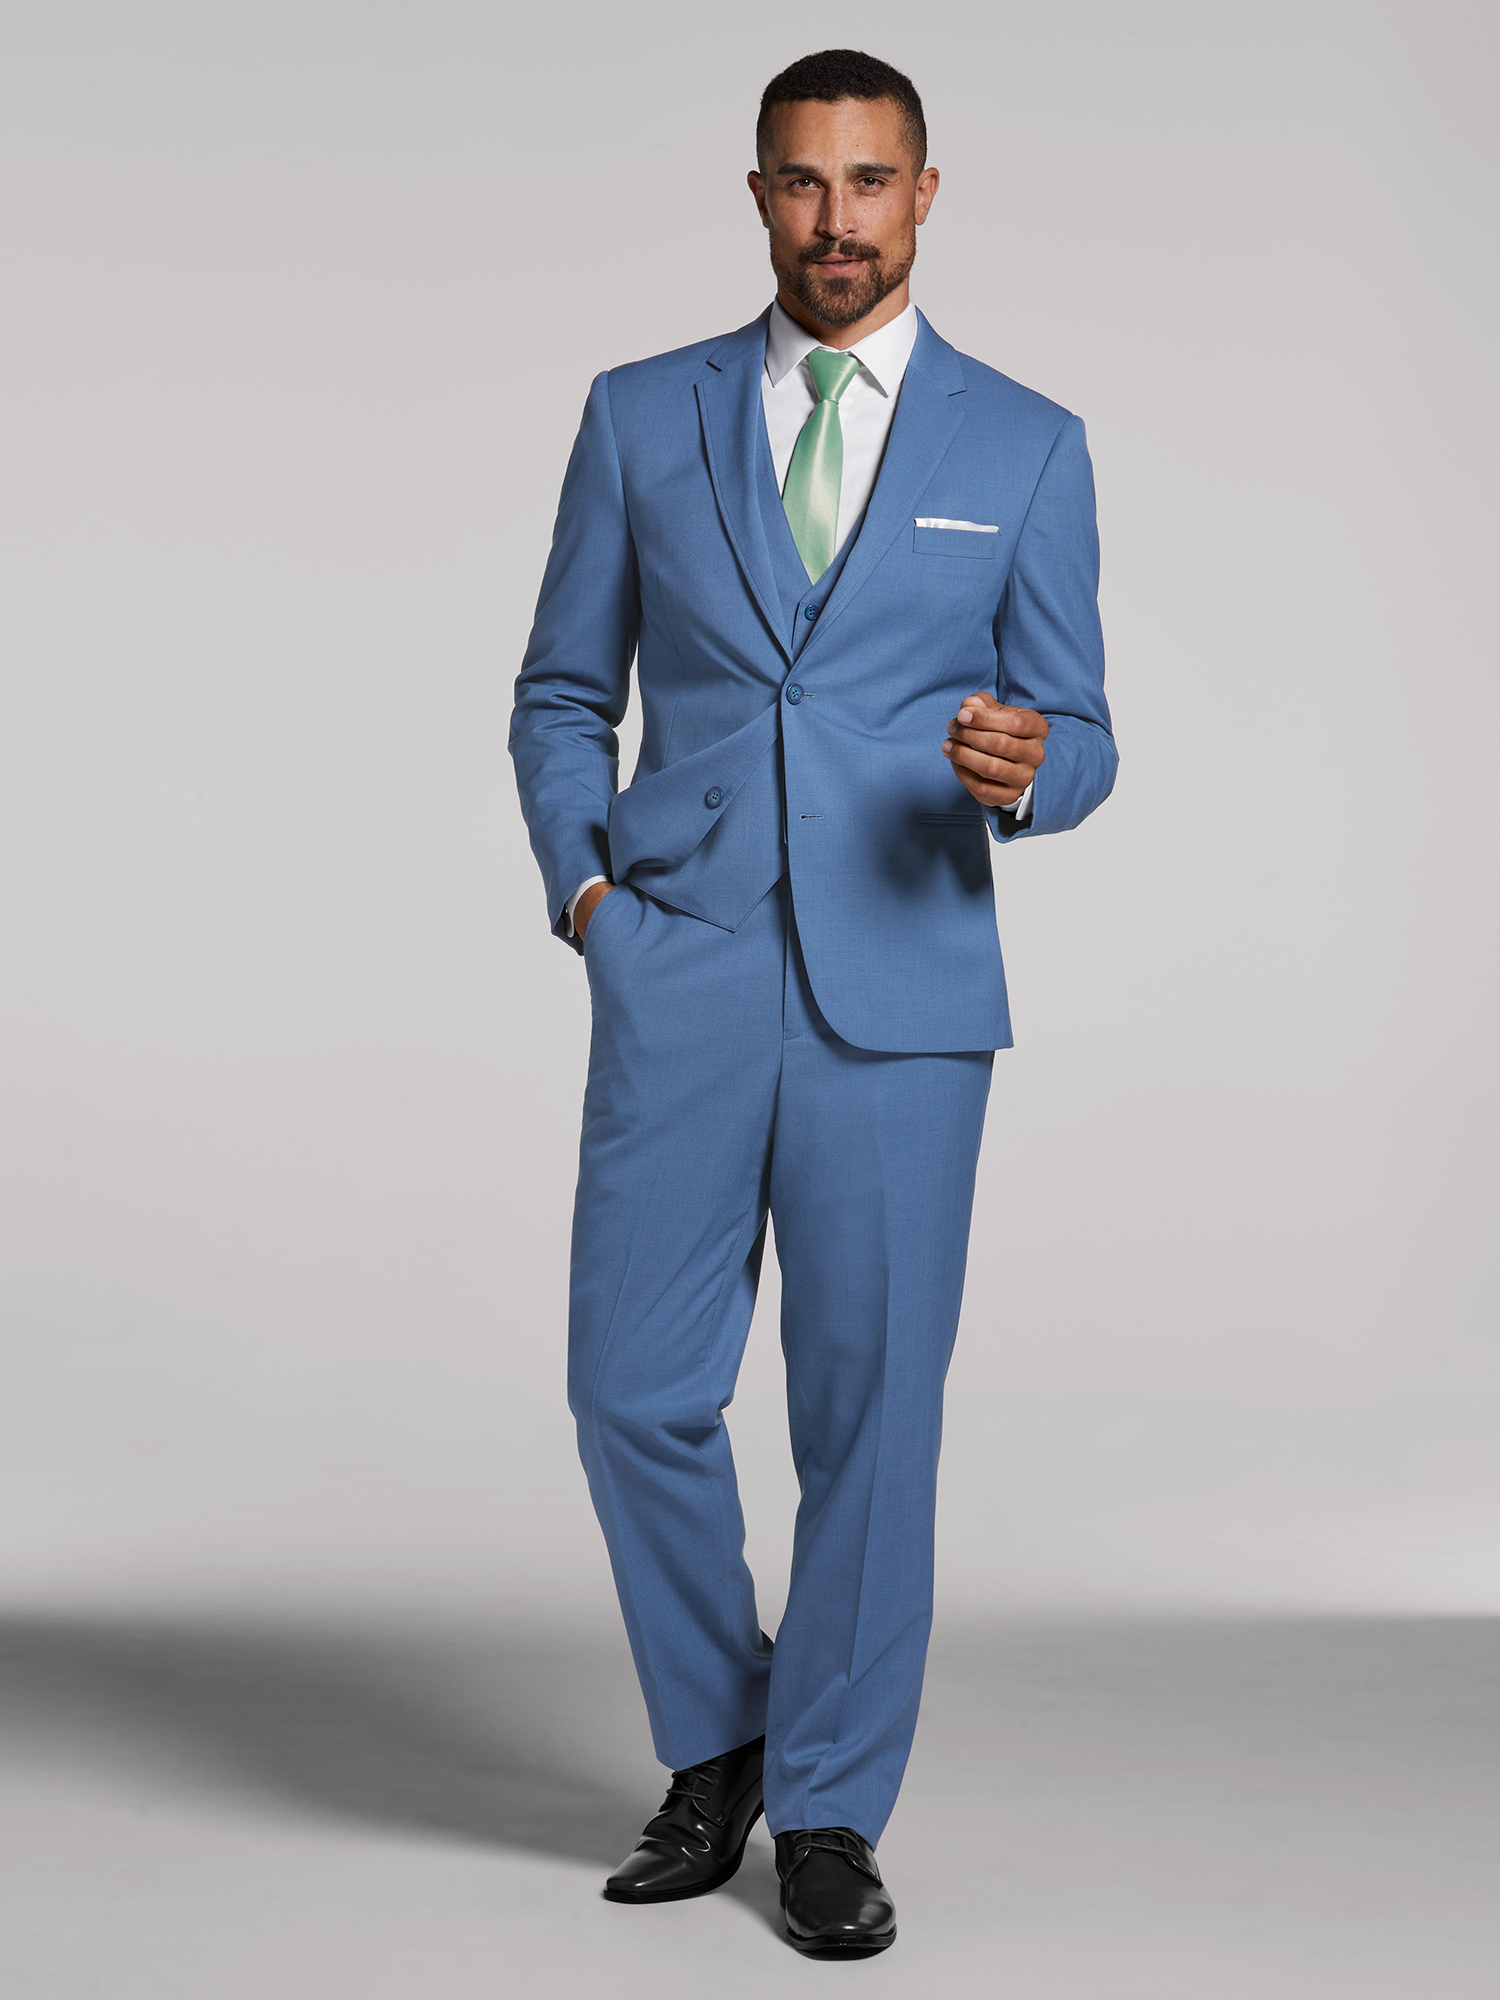 Royal Blue Suit, Buy Online Custom Tailored Suits & Shirts for Men, Canada